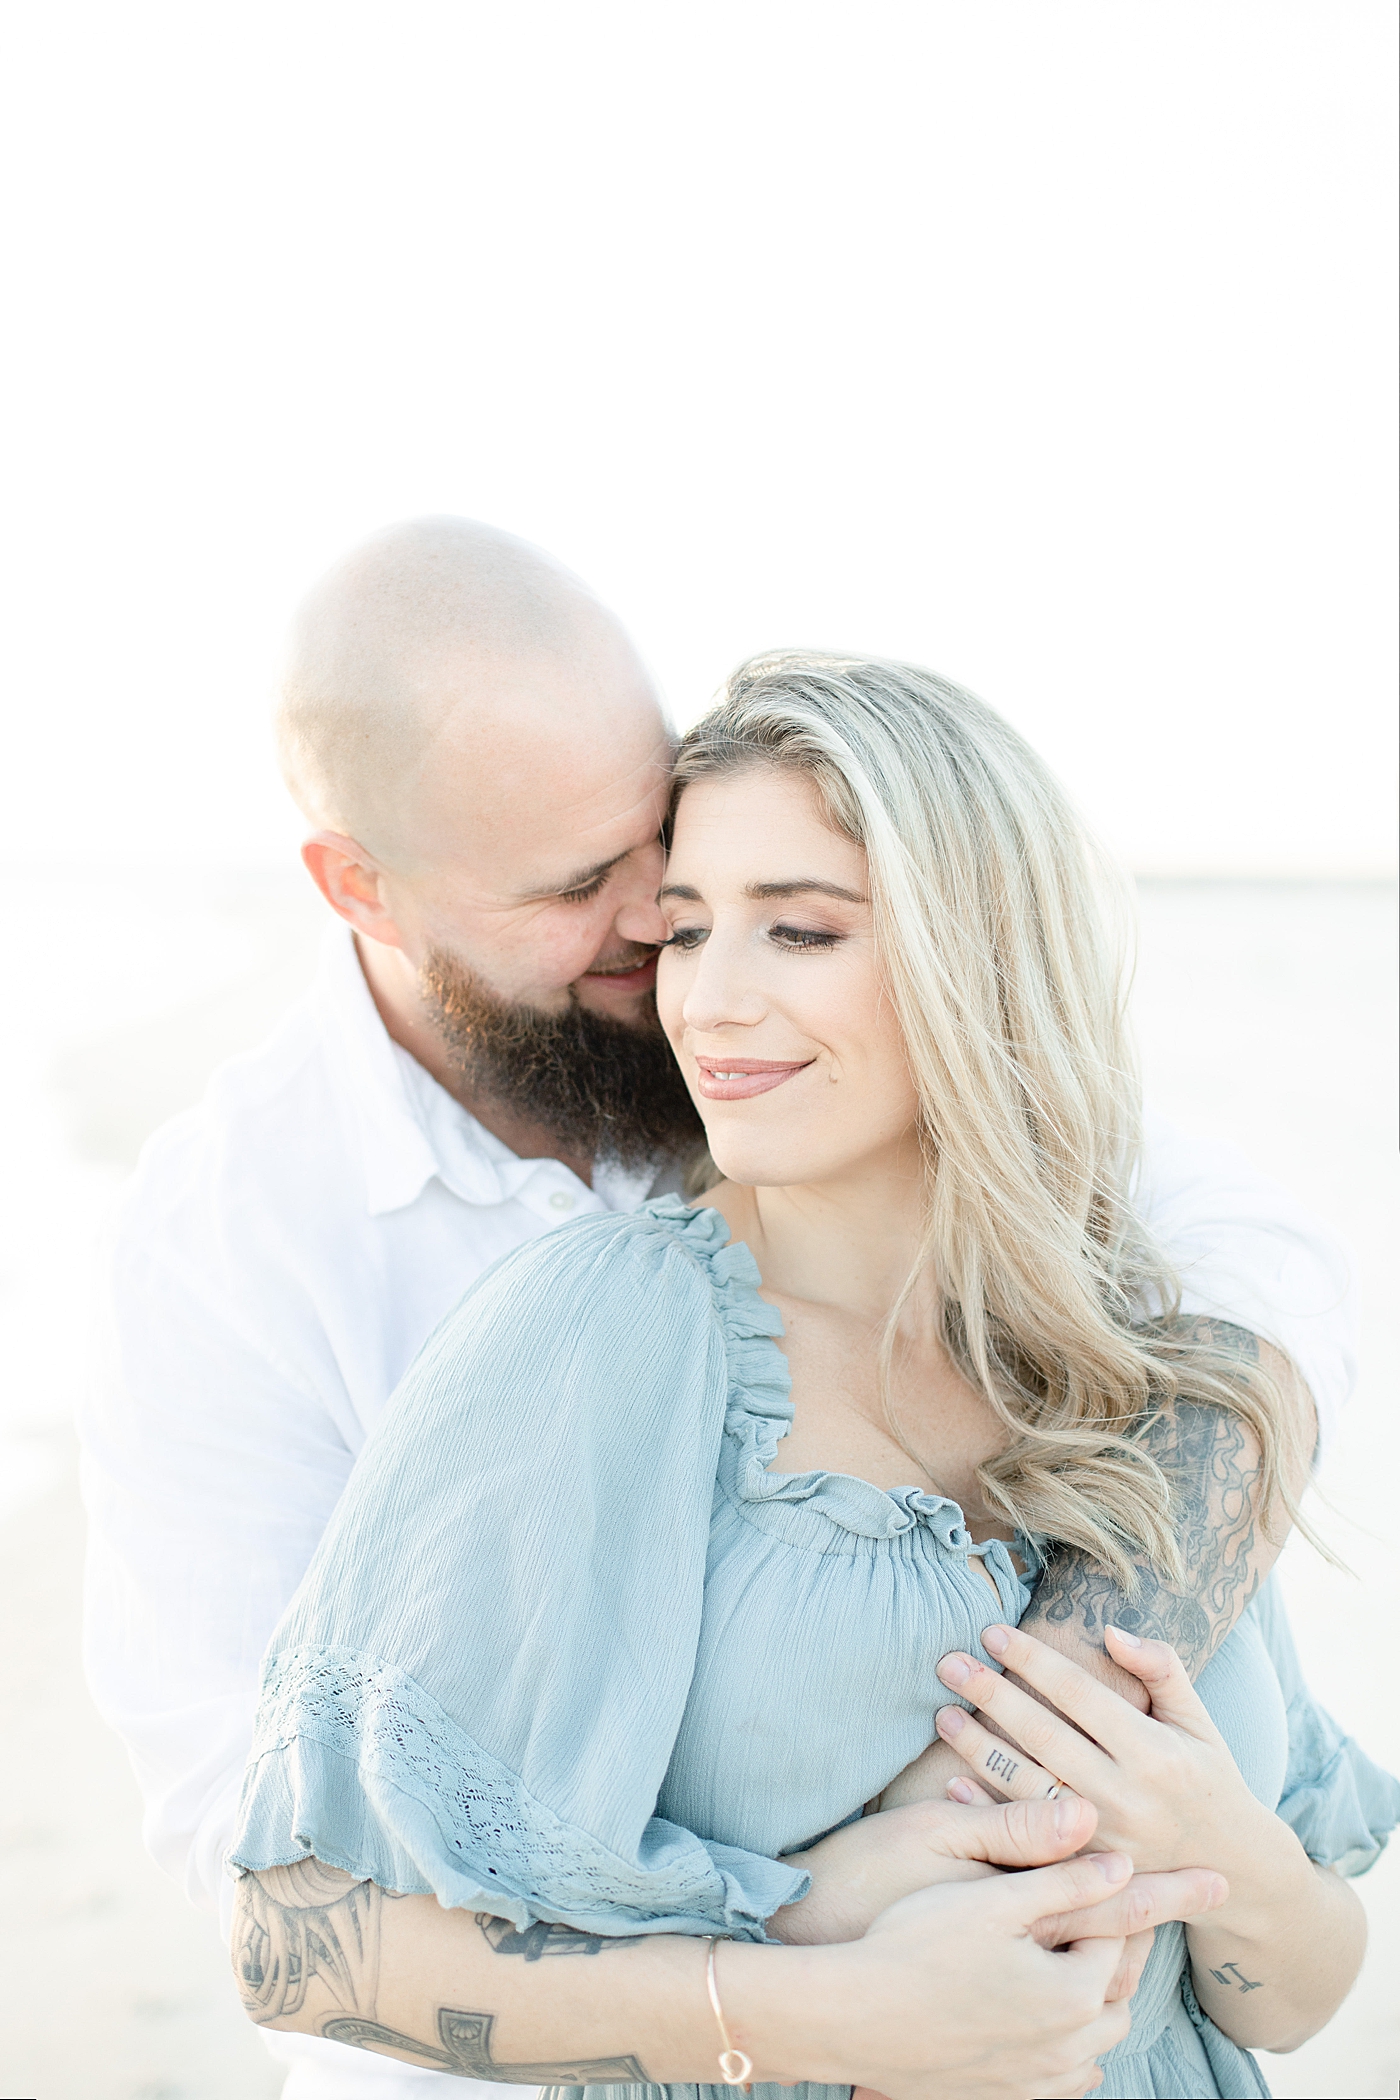 Mom and dad snuggling | Photo by Ocean Springs Family Photographer Little Sunshine Photography